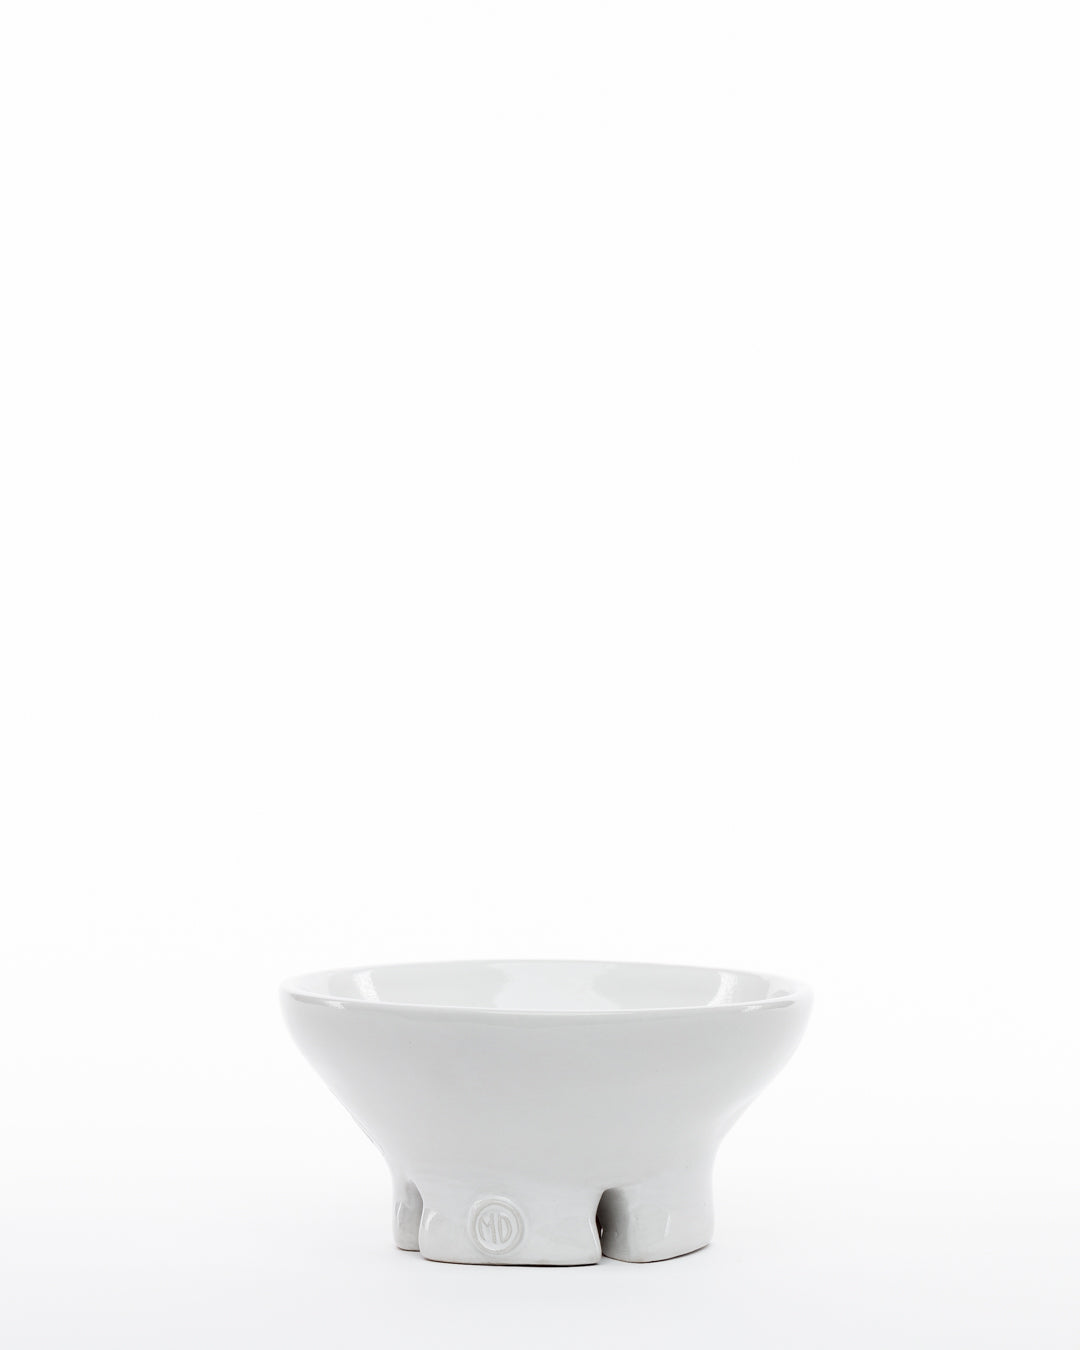 A simple white ceramic bowl with a unique design, featuring three small feet at its base, set against a plain white background in a Scottsdale Arizona bungalow - the Montes Doggett Catchall Bowl No. 257.